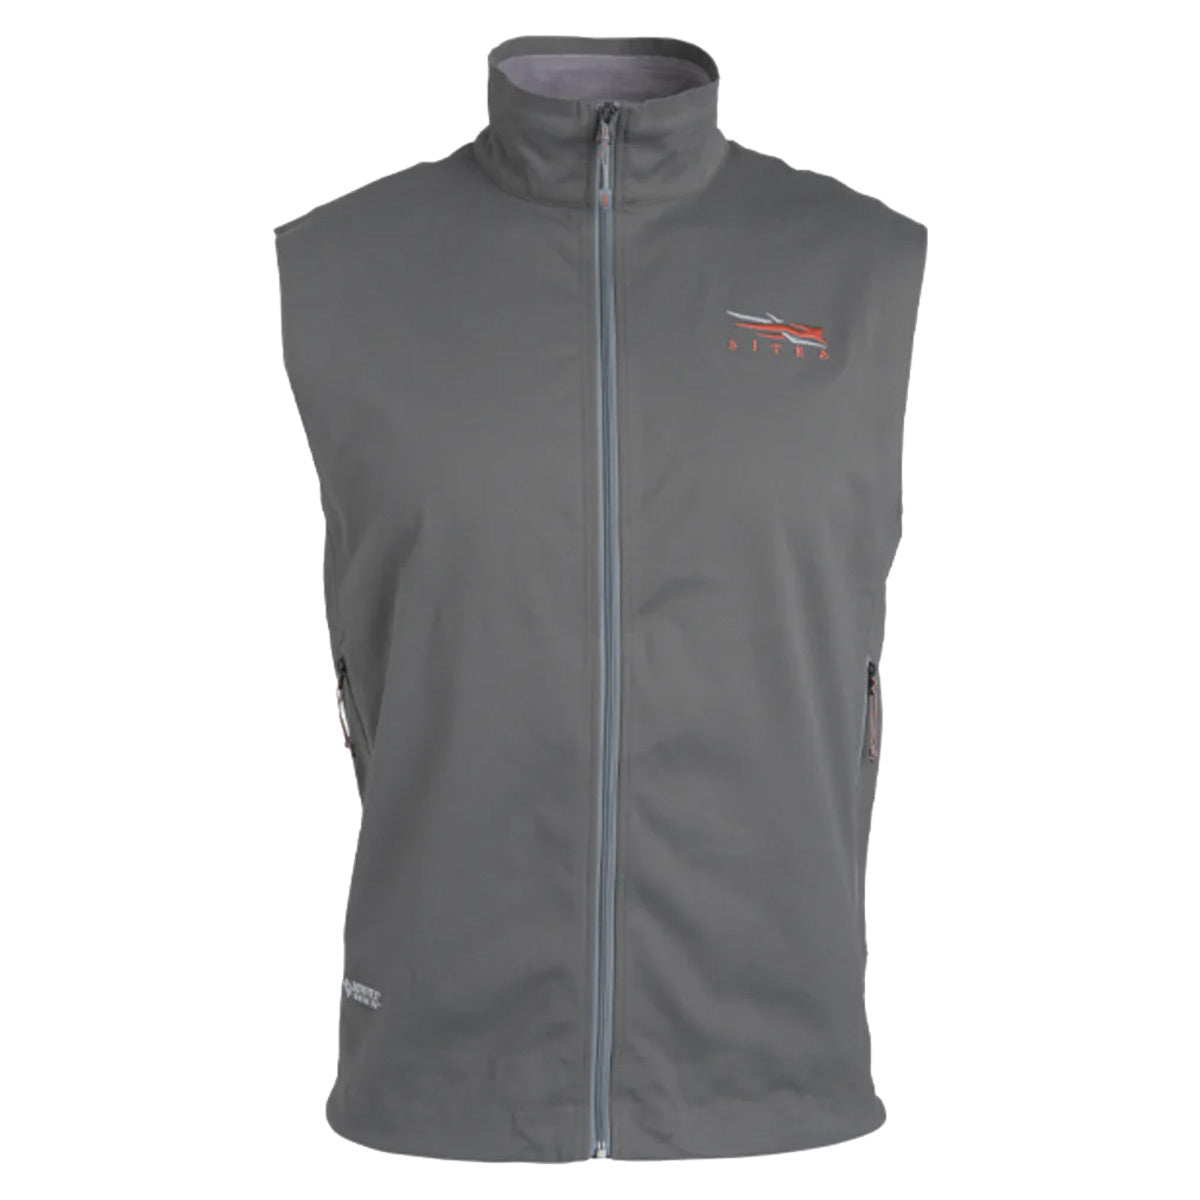 Sitka Mountain Vest in  by GOHUNT | Sitka - GOHUNT Shop